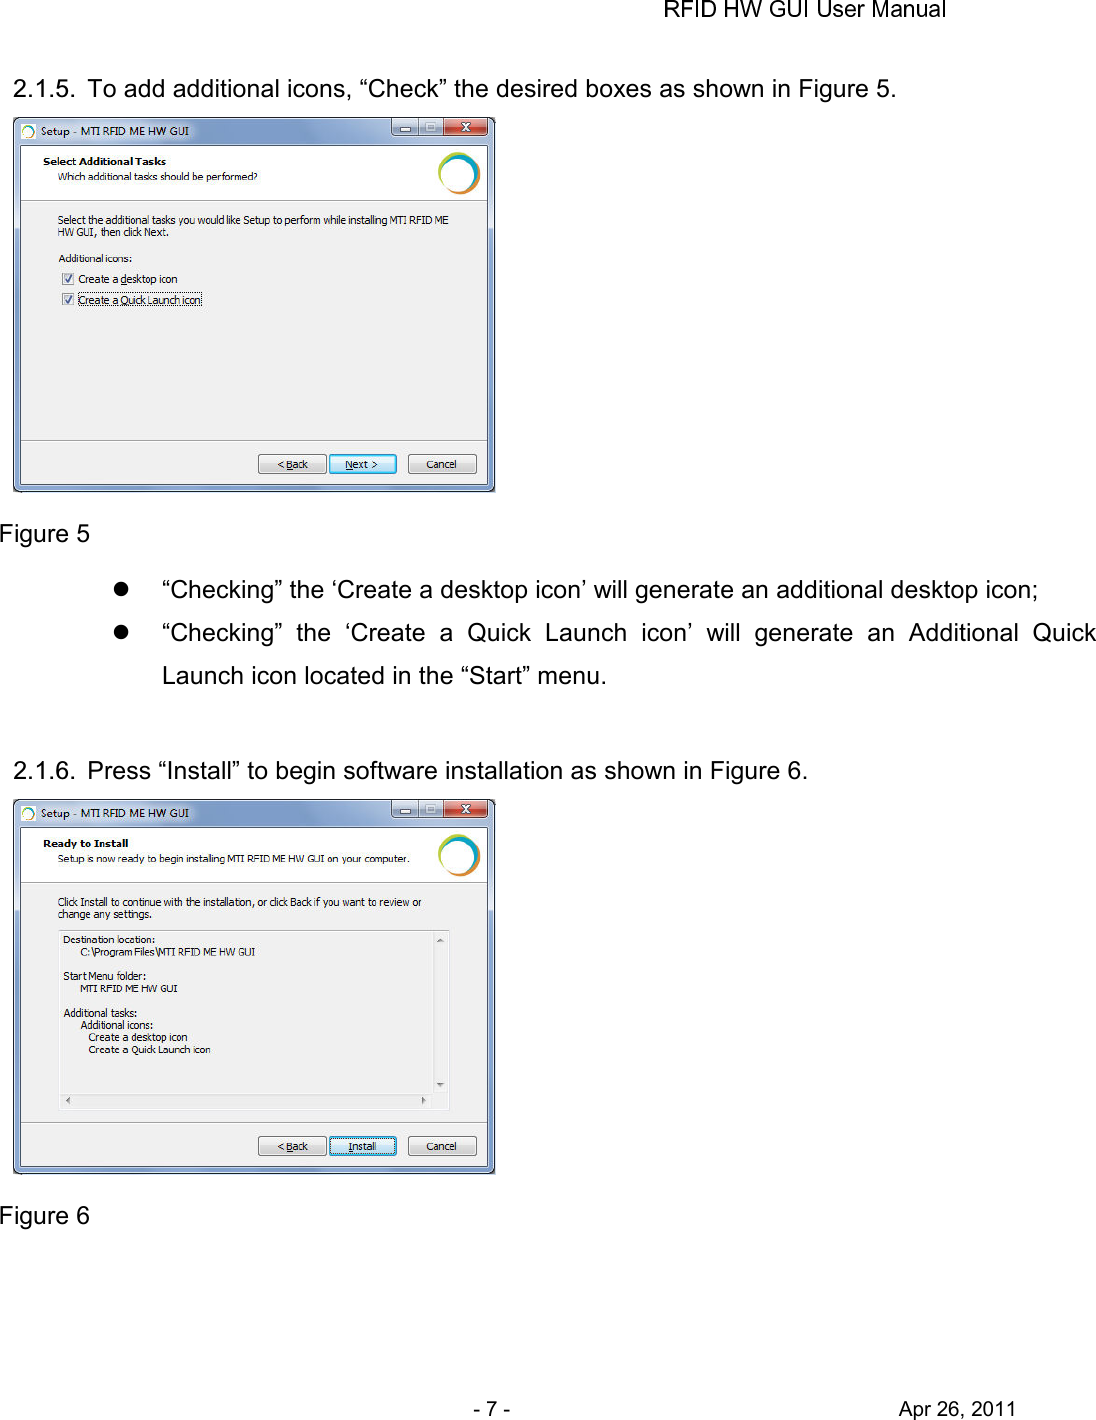       - 7 -                                     Apr 26, 2011 2.1.5.  To add additional icons, “Check” the desired boxes as shown in Figure 5.  Figure 5   “Checking” the ‘Create a desktop icon’ will generate an additional desktop icon;   “Checking”  the  ‘Create  a  Quick  Launch  icon’  will  generate  an  Additional  Quick Launch icon located in the “Start” menu.  2.1.6.  Press “Install” to begin software installation as shown in Figure 6.  Figure 6 